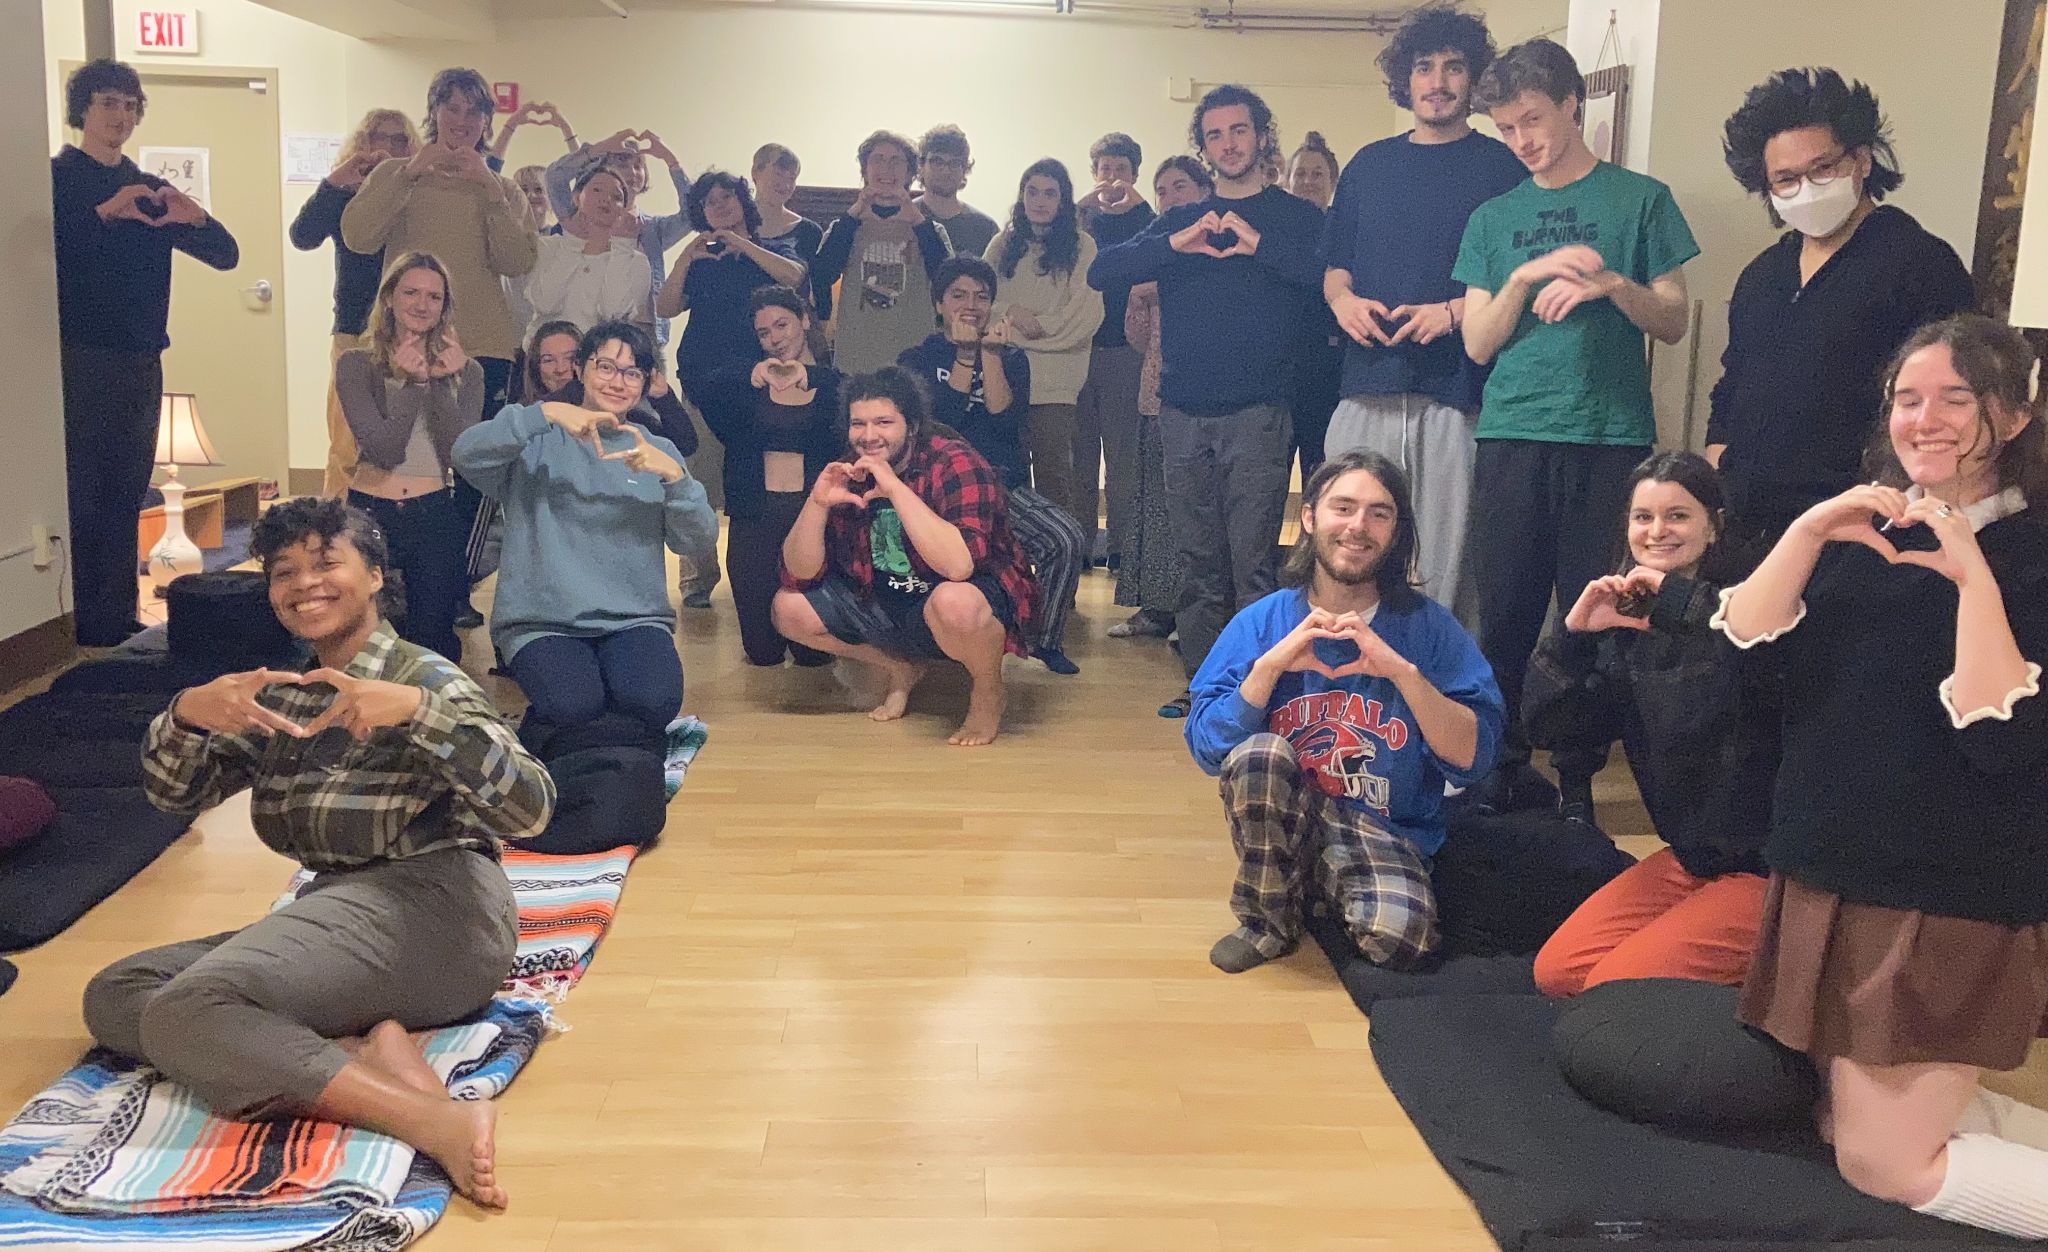 The Bard Meditation Group, led by Buddhist Chaplain <strong>Tatjana von Prittwitz und Gaffron CCS '99</strong>. More students than ever are participating in guided meditations and silent meditations. Everybody is welcome at these sangha gatherings—appreciating the preciousness of life together, cultivating our interconnection, and generating compassion.